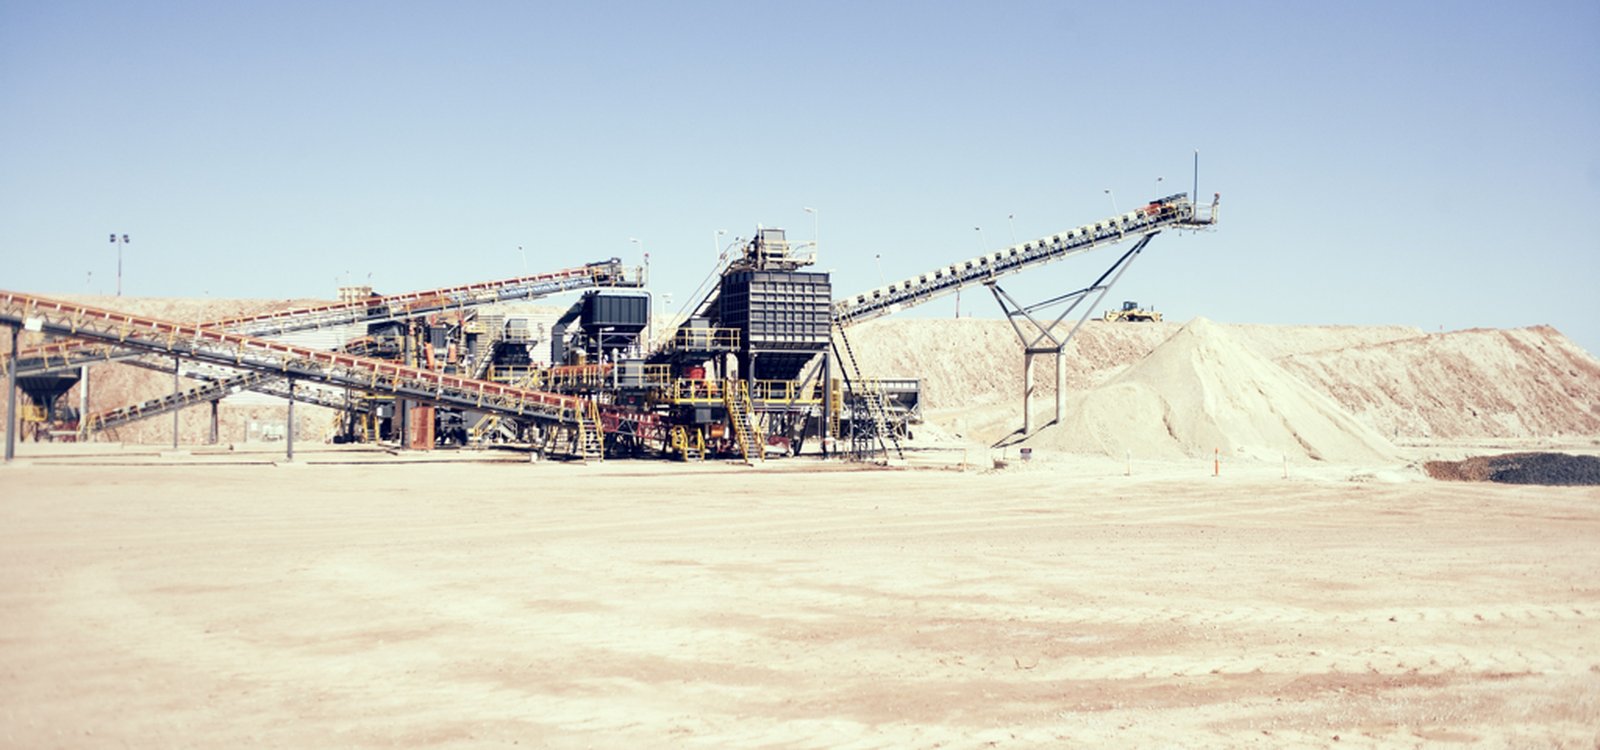 The Sandvik-supplied crushing and screening plant at the Rosemont gold mine in the middle of the red-coloured Western Australian bush lands is an integral part of Regis Resources’ efficient gold production.